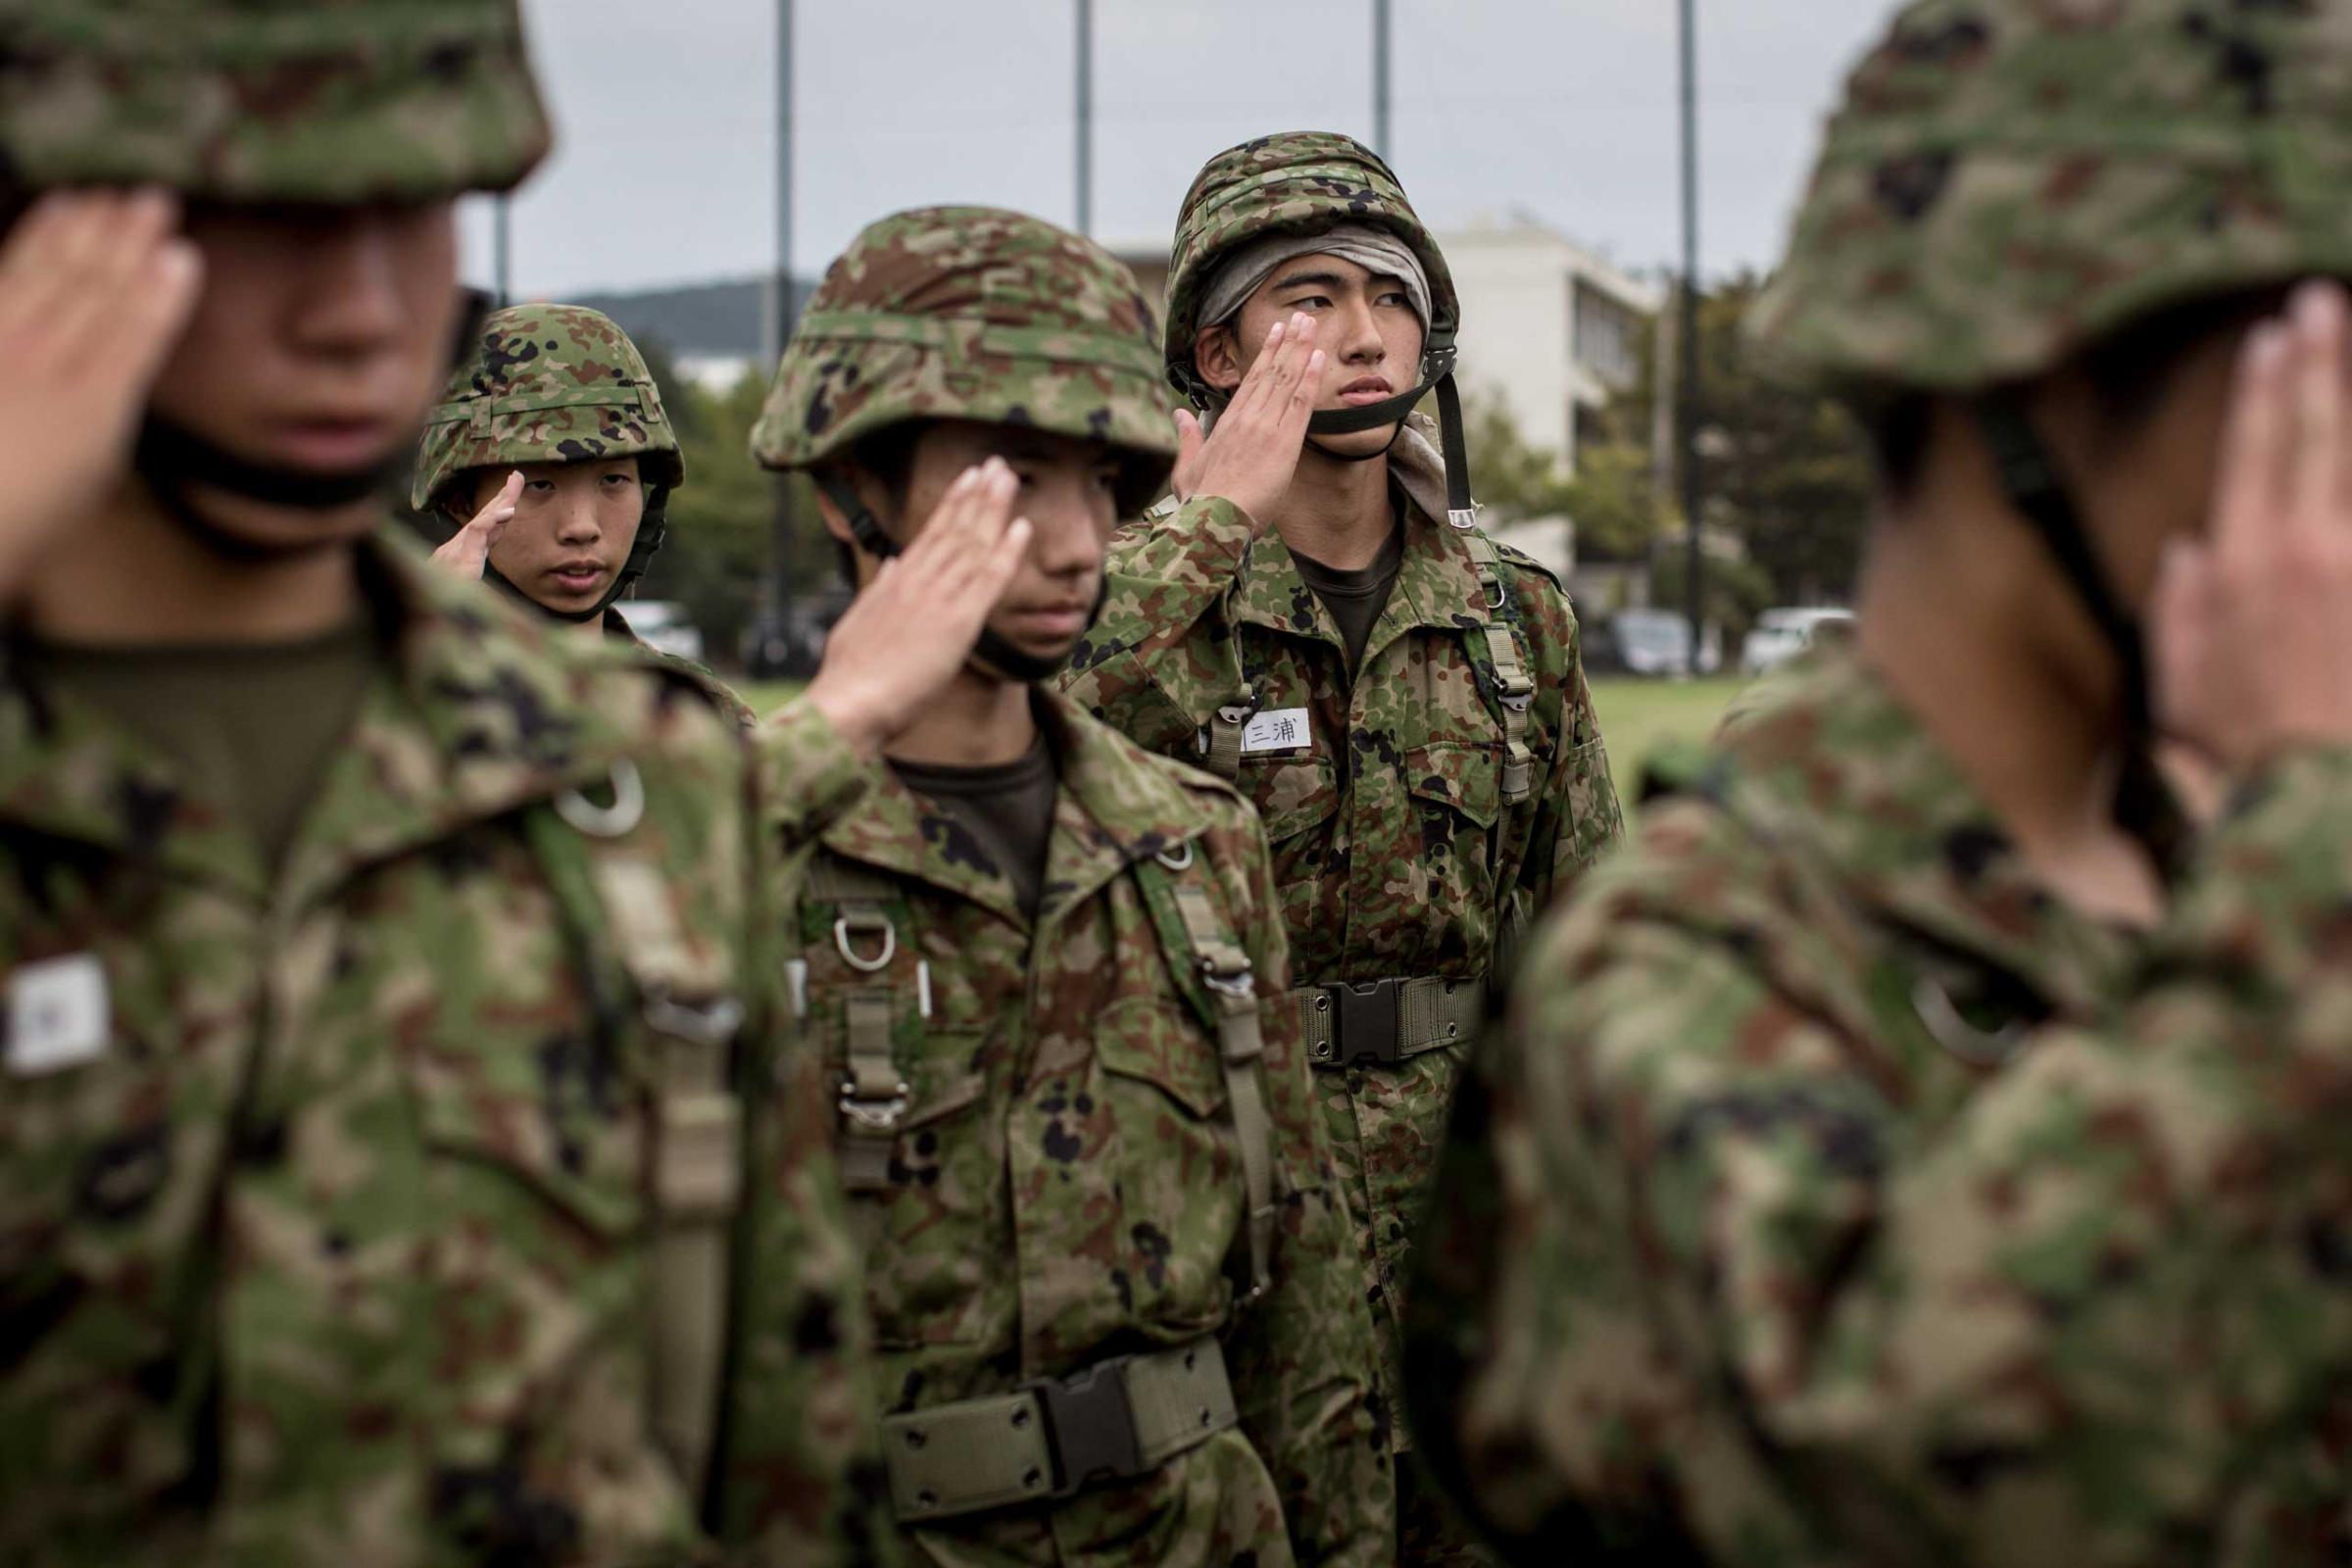 Students salute their teacher after finishing rifle training.